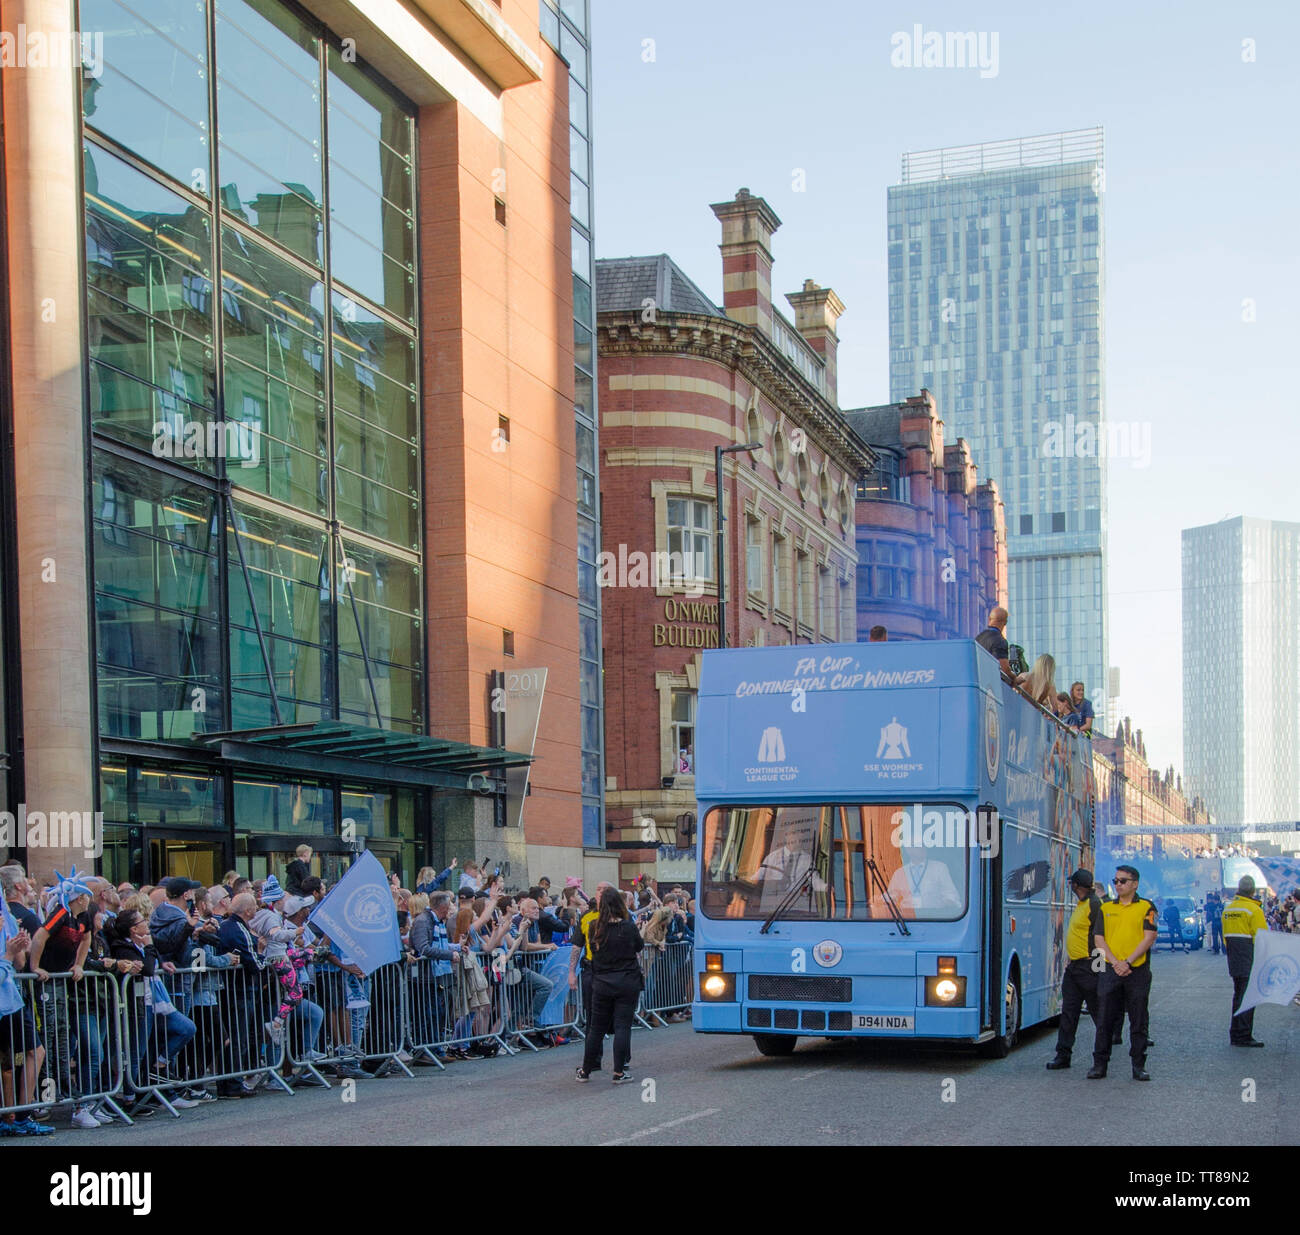 Manchester City Homecoming 2019 Stock Photo